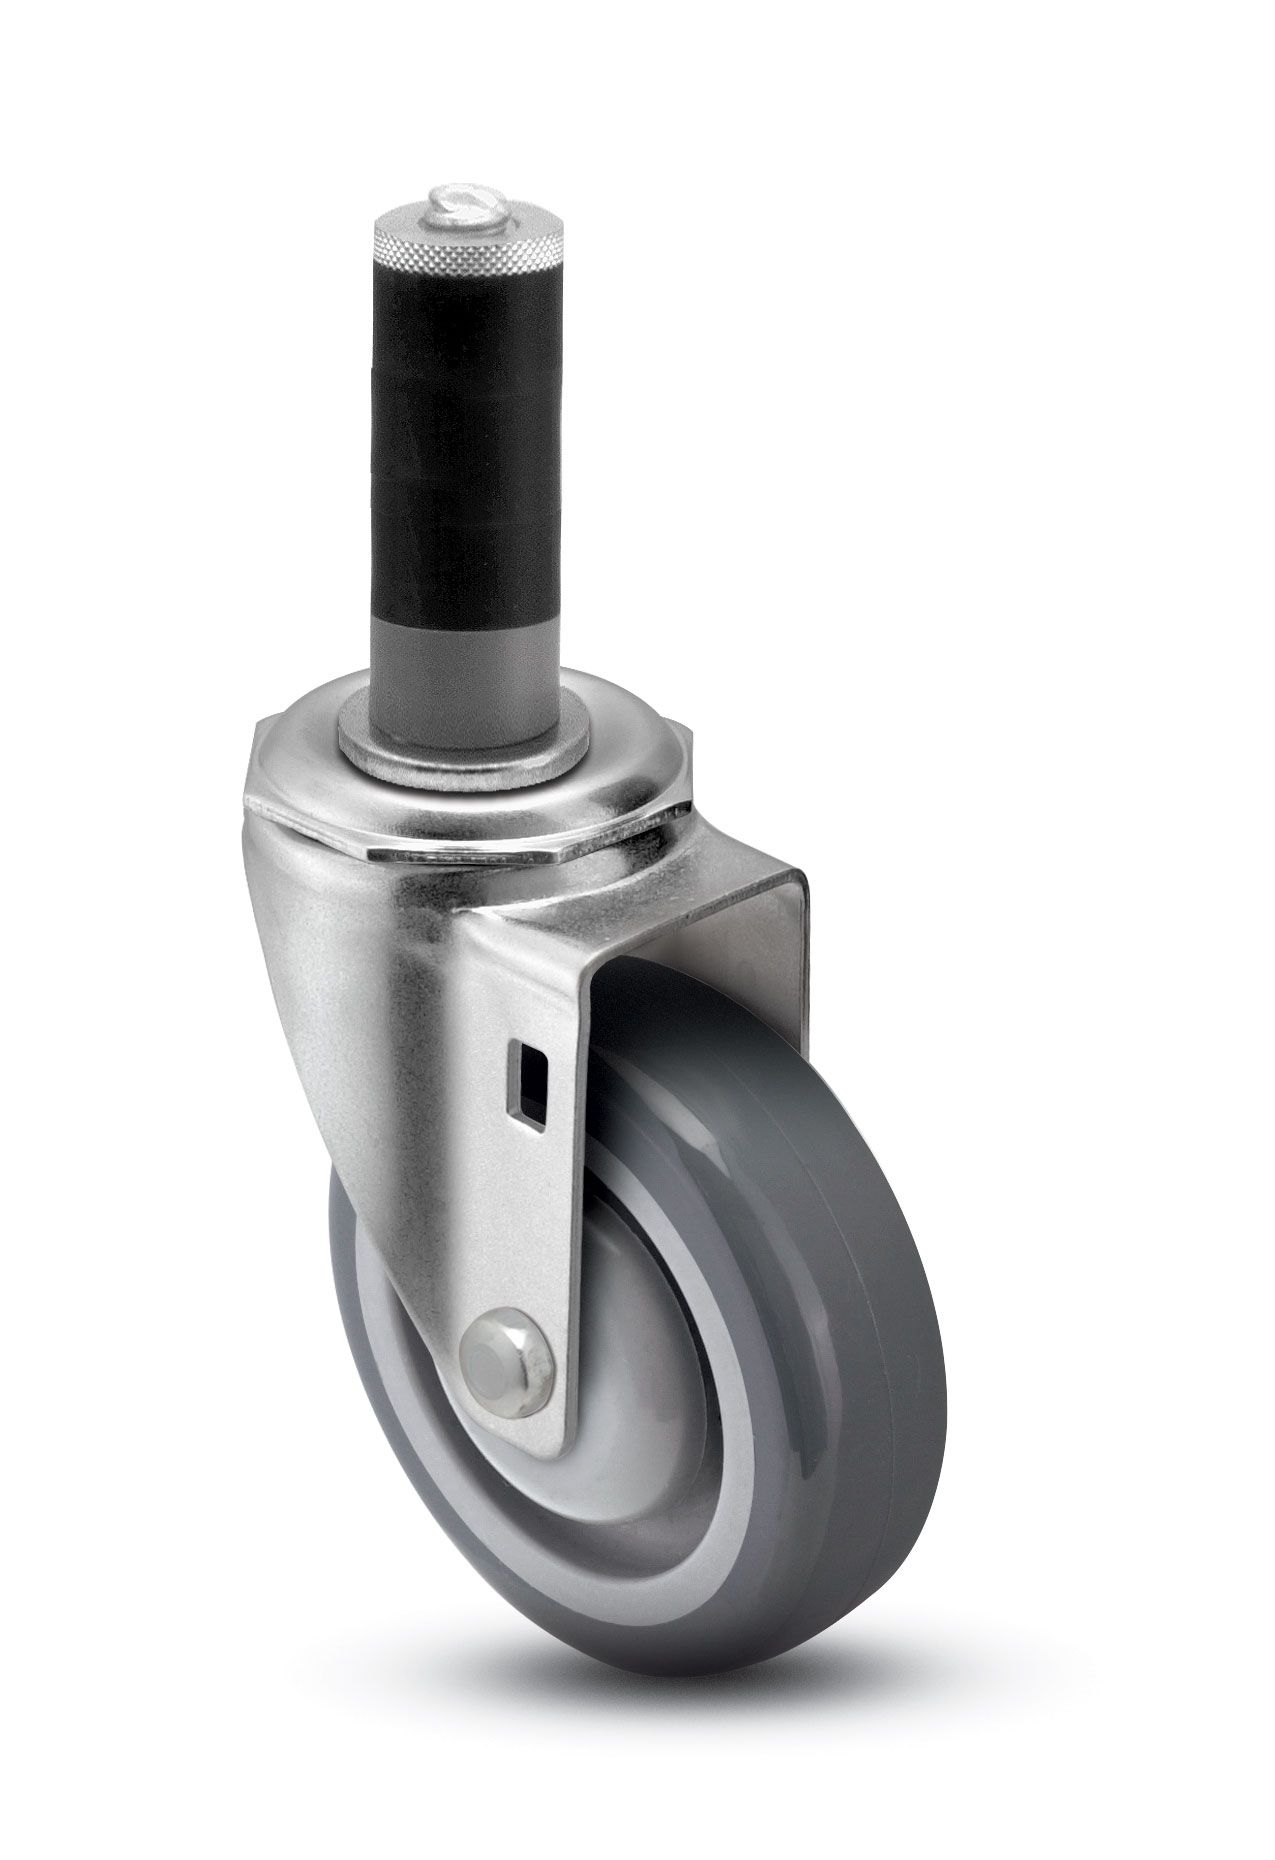 Caster; Swivel; 5" x 1-1/4"; PolyU on PolyO (Gray); Expandable Adapter (1" - 1-1/16" ID tubing); Zinc; Precision Ball Brng; 300#; Total Lock; Dust Cover (Item #65052)